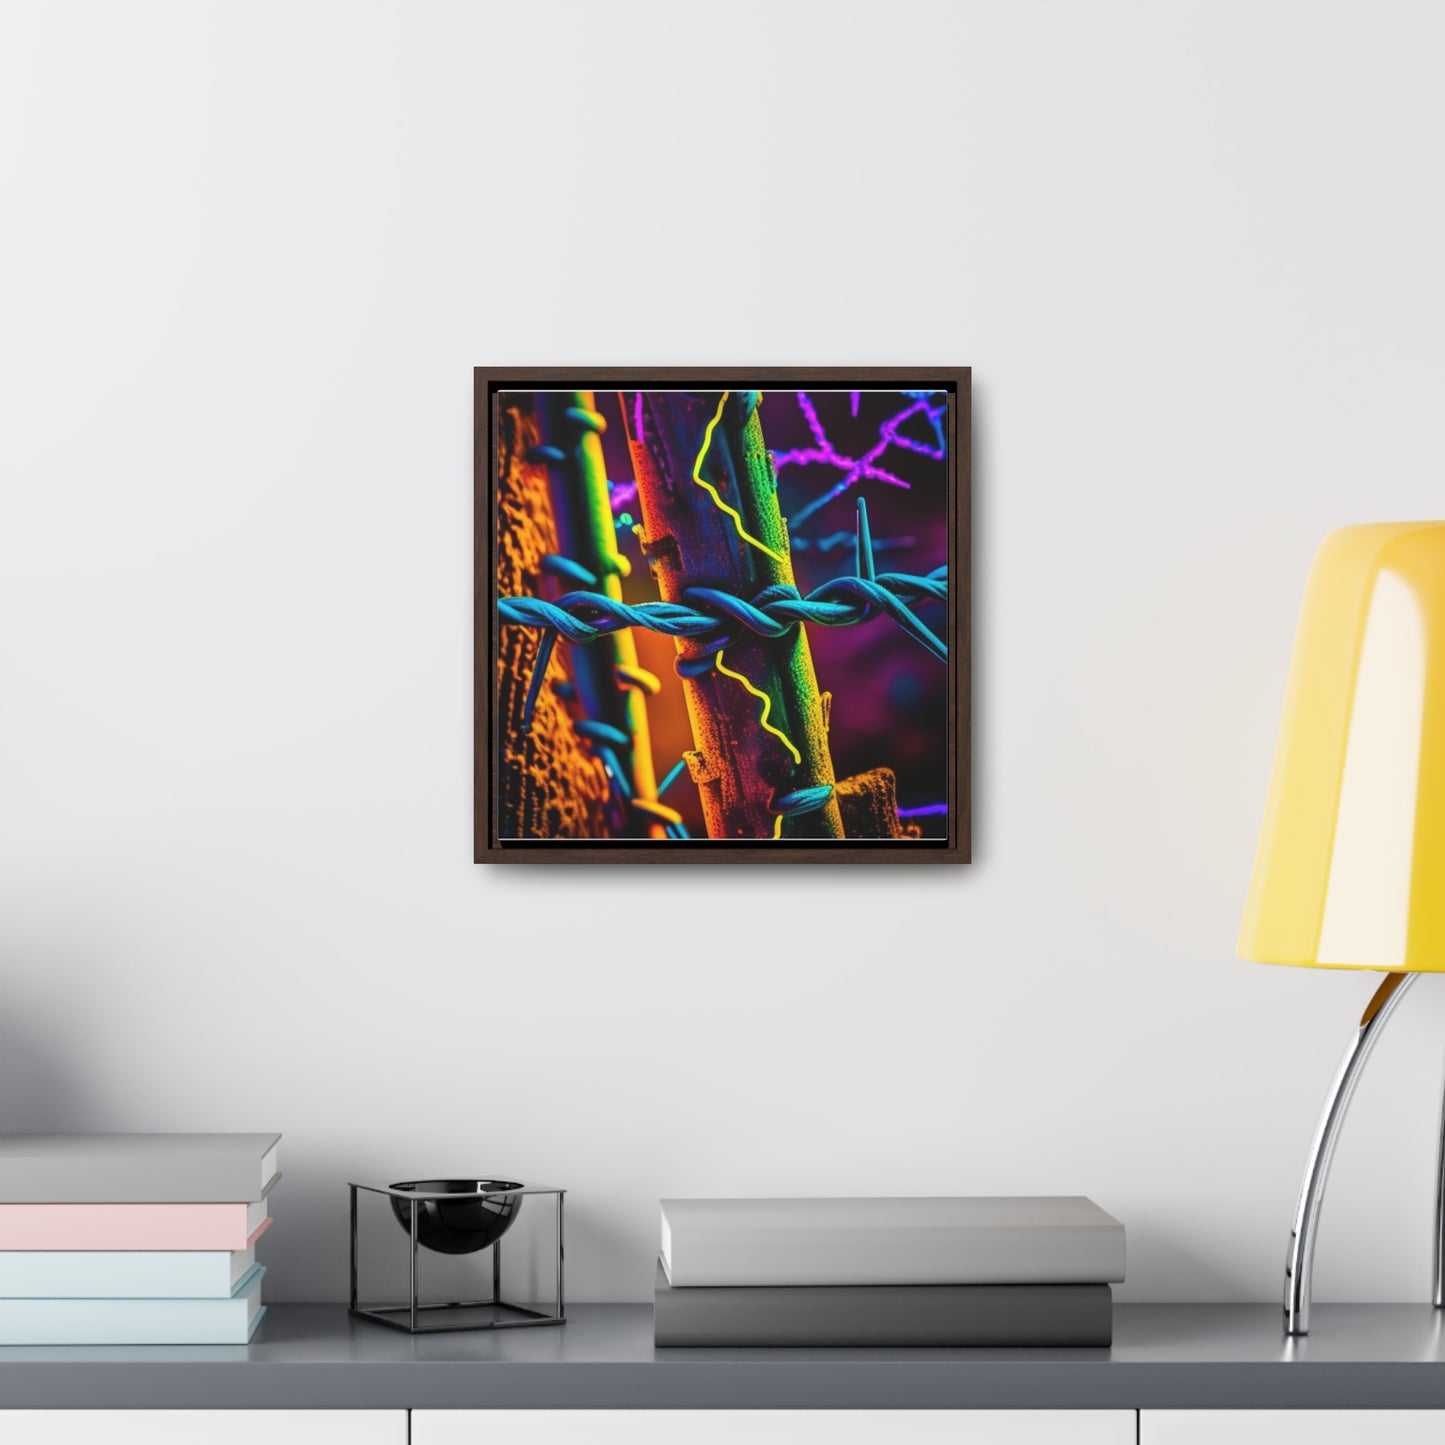 Gallery Canvas Wraps, Square Frame Macro Neon Barb 2